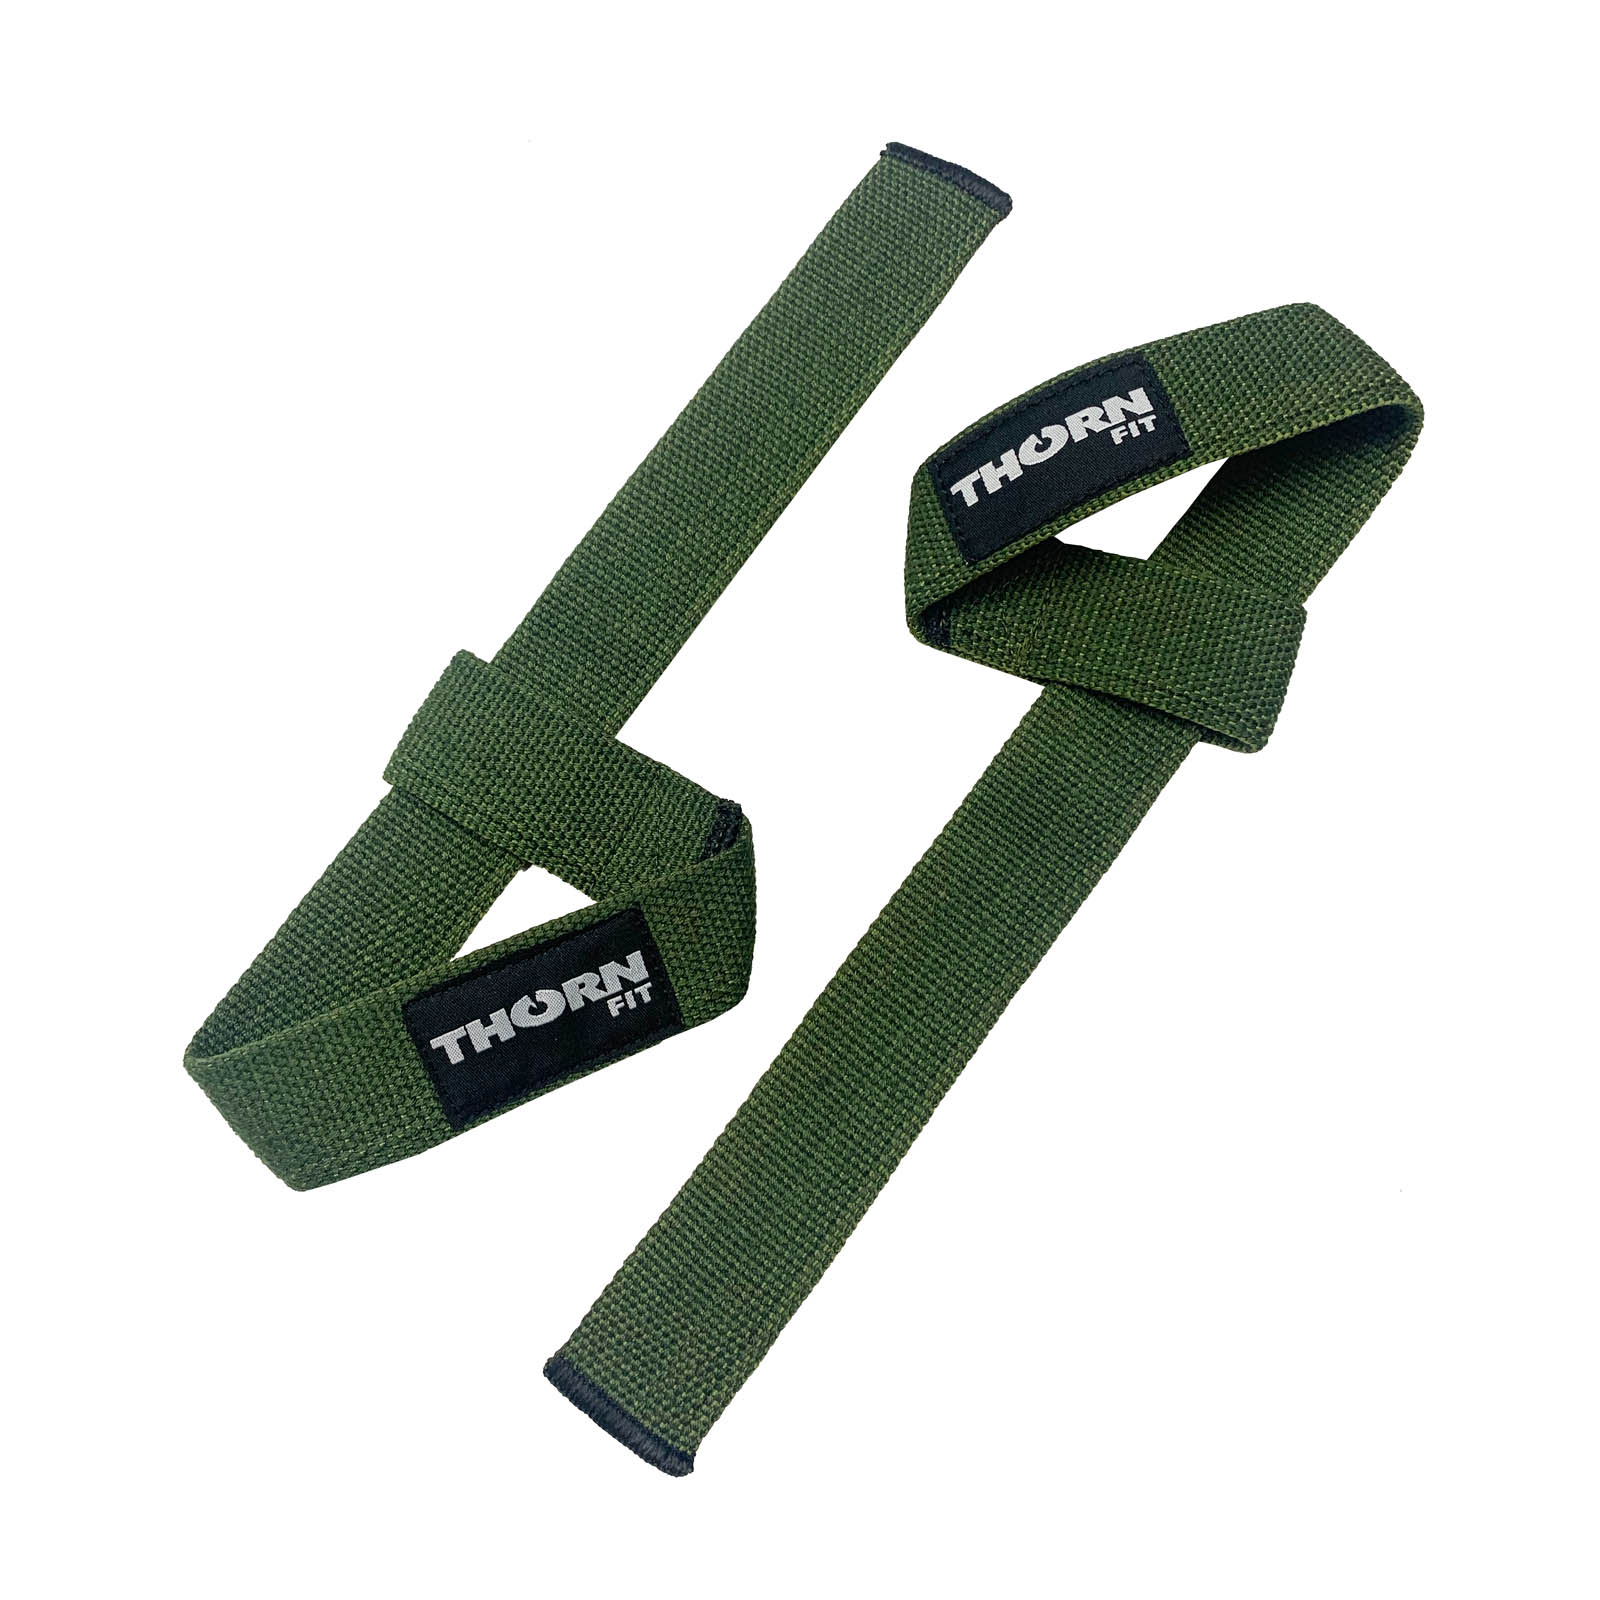 THORN FIT Lifting straps cotton army green – Thorn Fit, Crossfit equipment